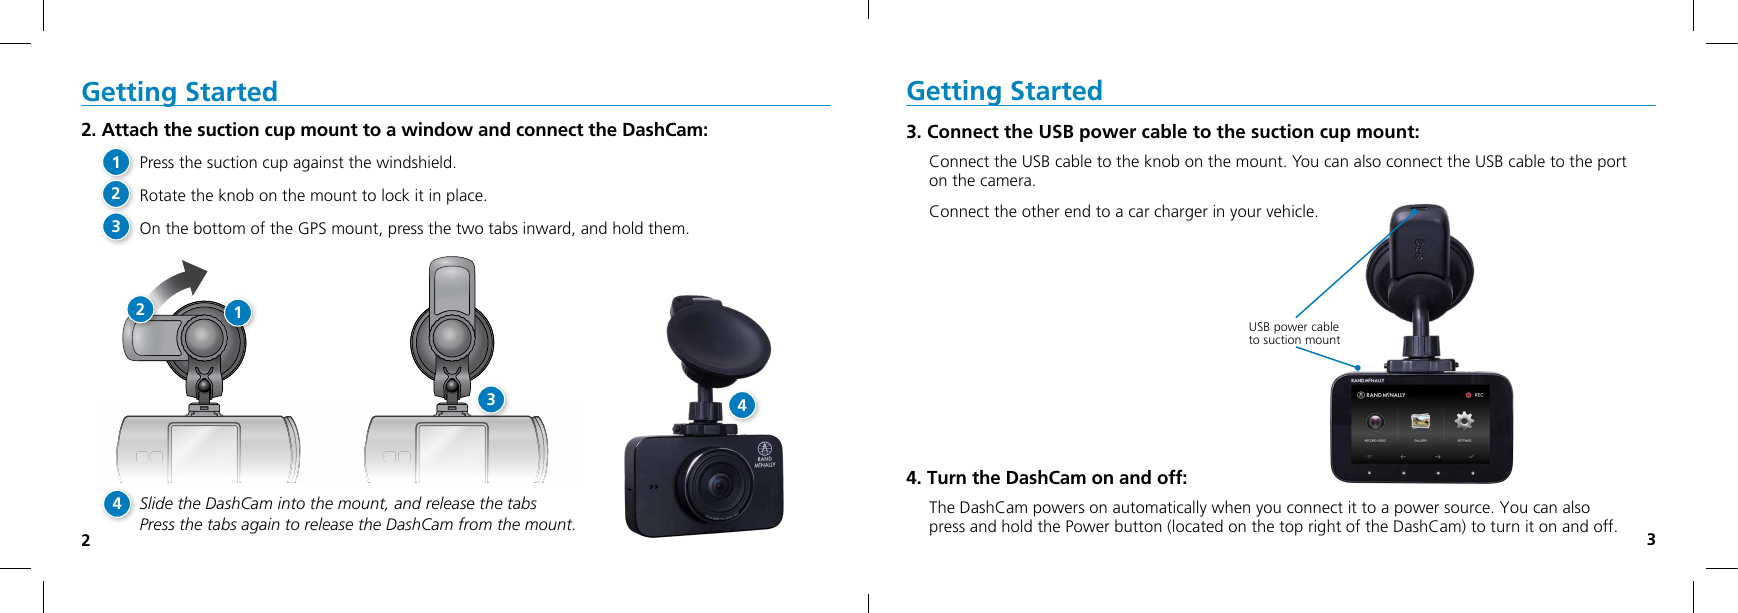 23Getting Started3. Connect the USB power cable to the suction cup mount:Connect the USB cable to the knob on the mount. You can also connect the USB cable to the port on the camera.Connect the other end to a car charger in your vehicle.4. Turn the DashCam on and off:The DashCam powers on automatically when you connect it to a power source. You can also  press and hold the Power button (located on the top right of the DashCam) to turn it on and off.USB power cable  to suction mountGetting Started2. Attach the suction cup mount to a window and connect the DashCam:Press the suction cup against the windshield.Rotate the knob on the mount to lock it in place.On the bottom of the GPS mount, press the two tabs inward, and hold them.Slide the DashCam into the mount, and release the tabs  Press the tabs again to release the DashCam from the mount.12341234